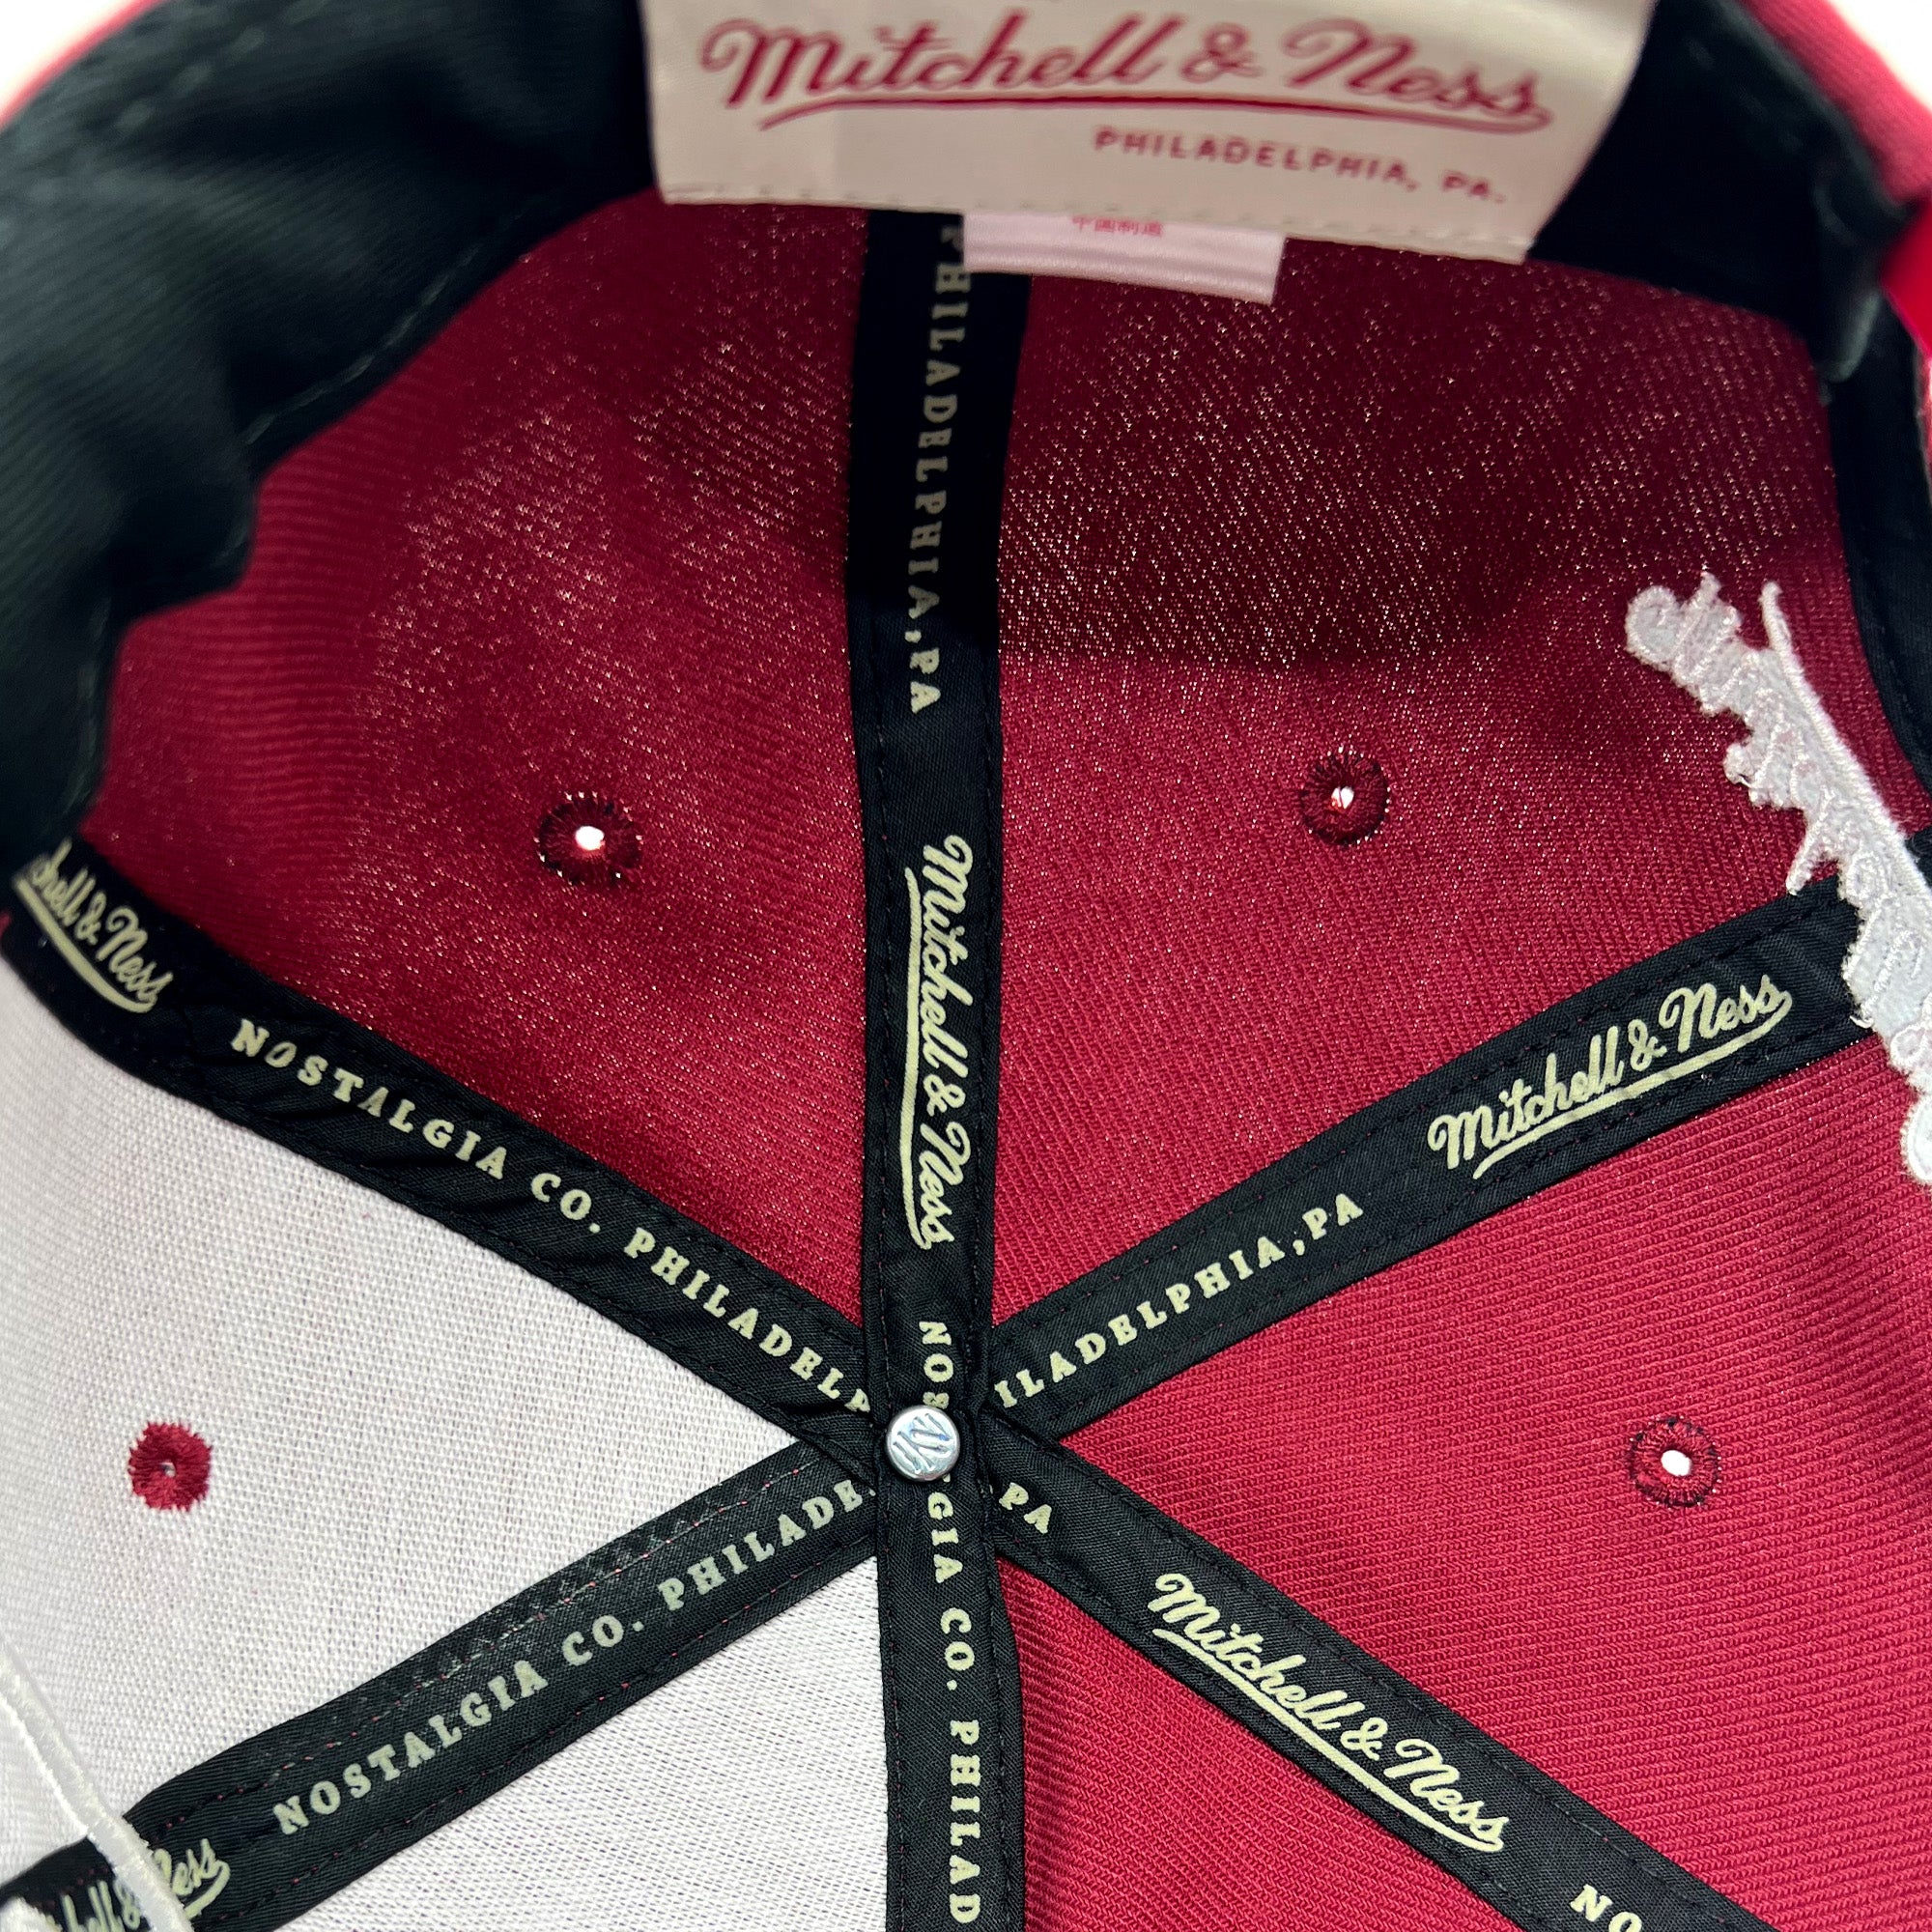 Detailed close-up of Mitchell & Ness taping inside the crown of a cardinal red cap.